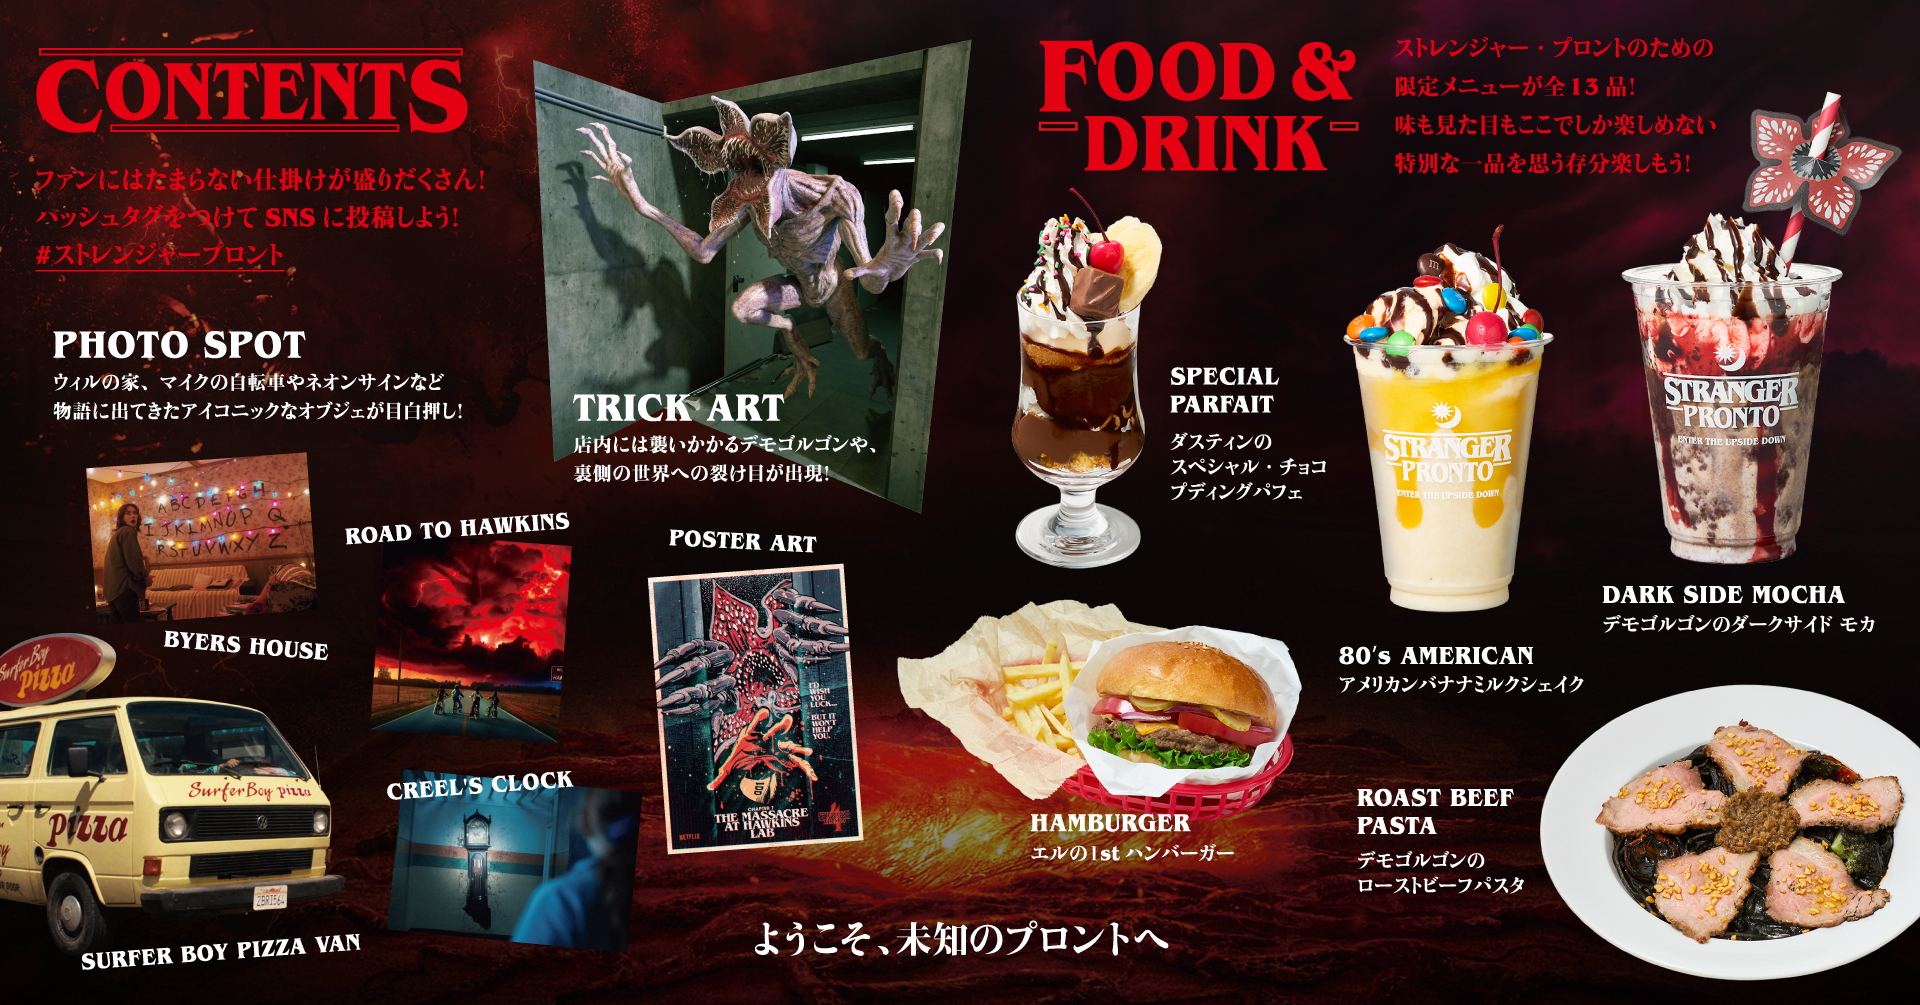 There's now a 'Stranger Things' pop-up café in Shibuya